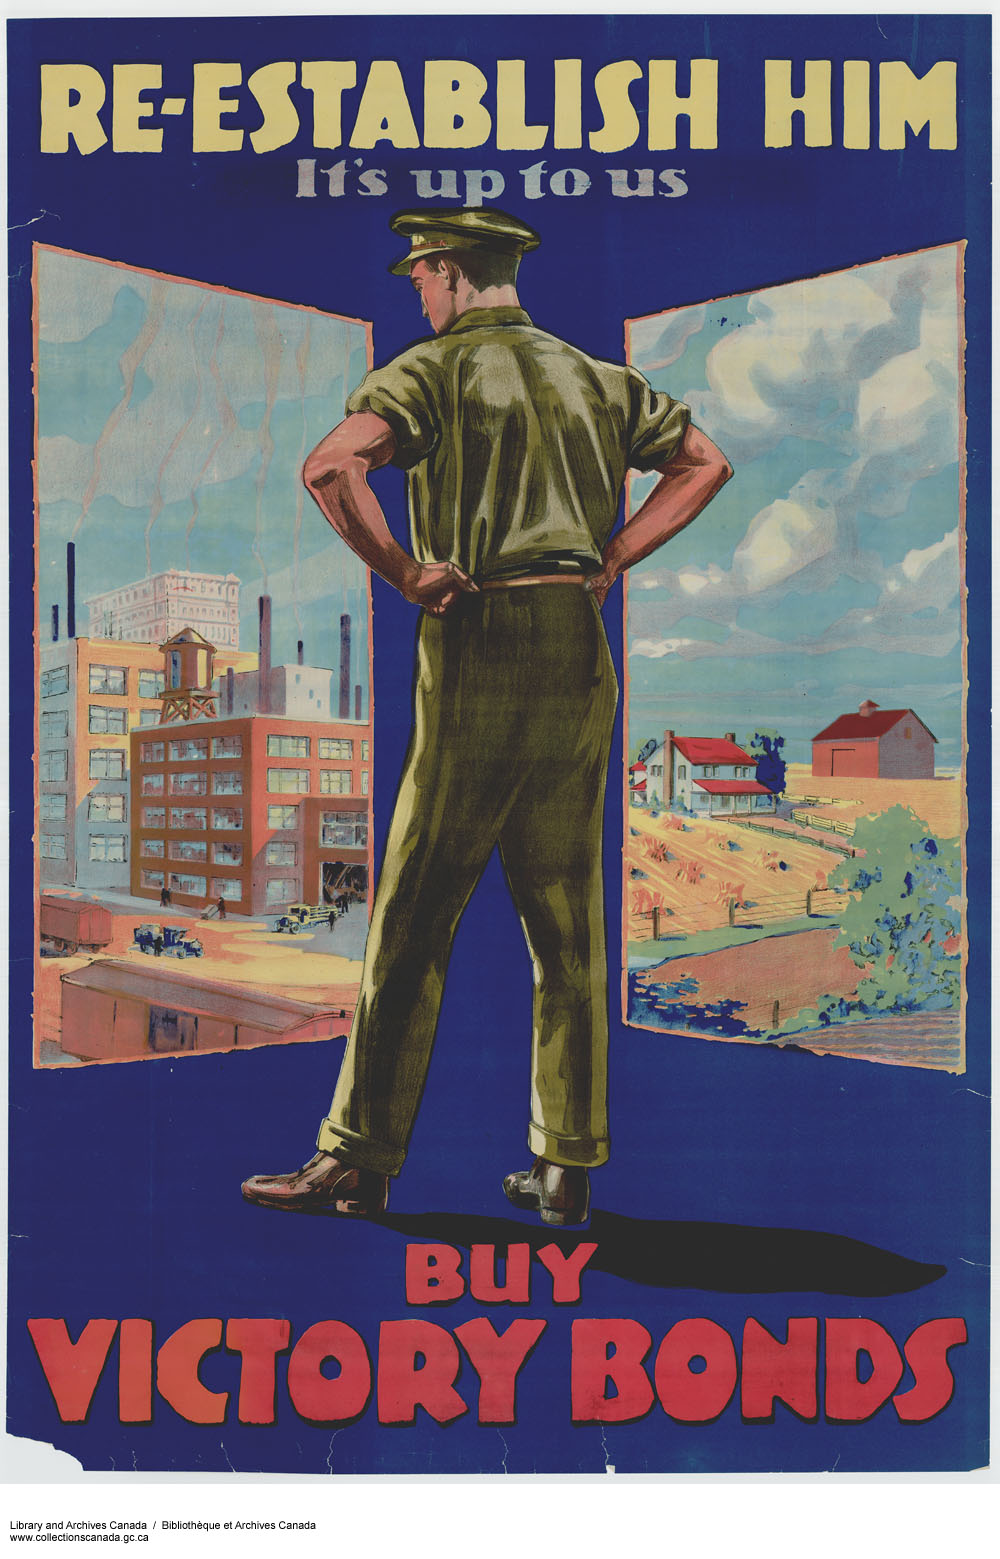 A soldier views a factory and farm. Caption: "Re-establish him: It's up to us. Buy victory bonds."